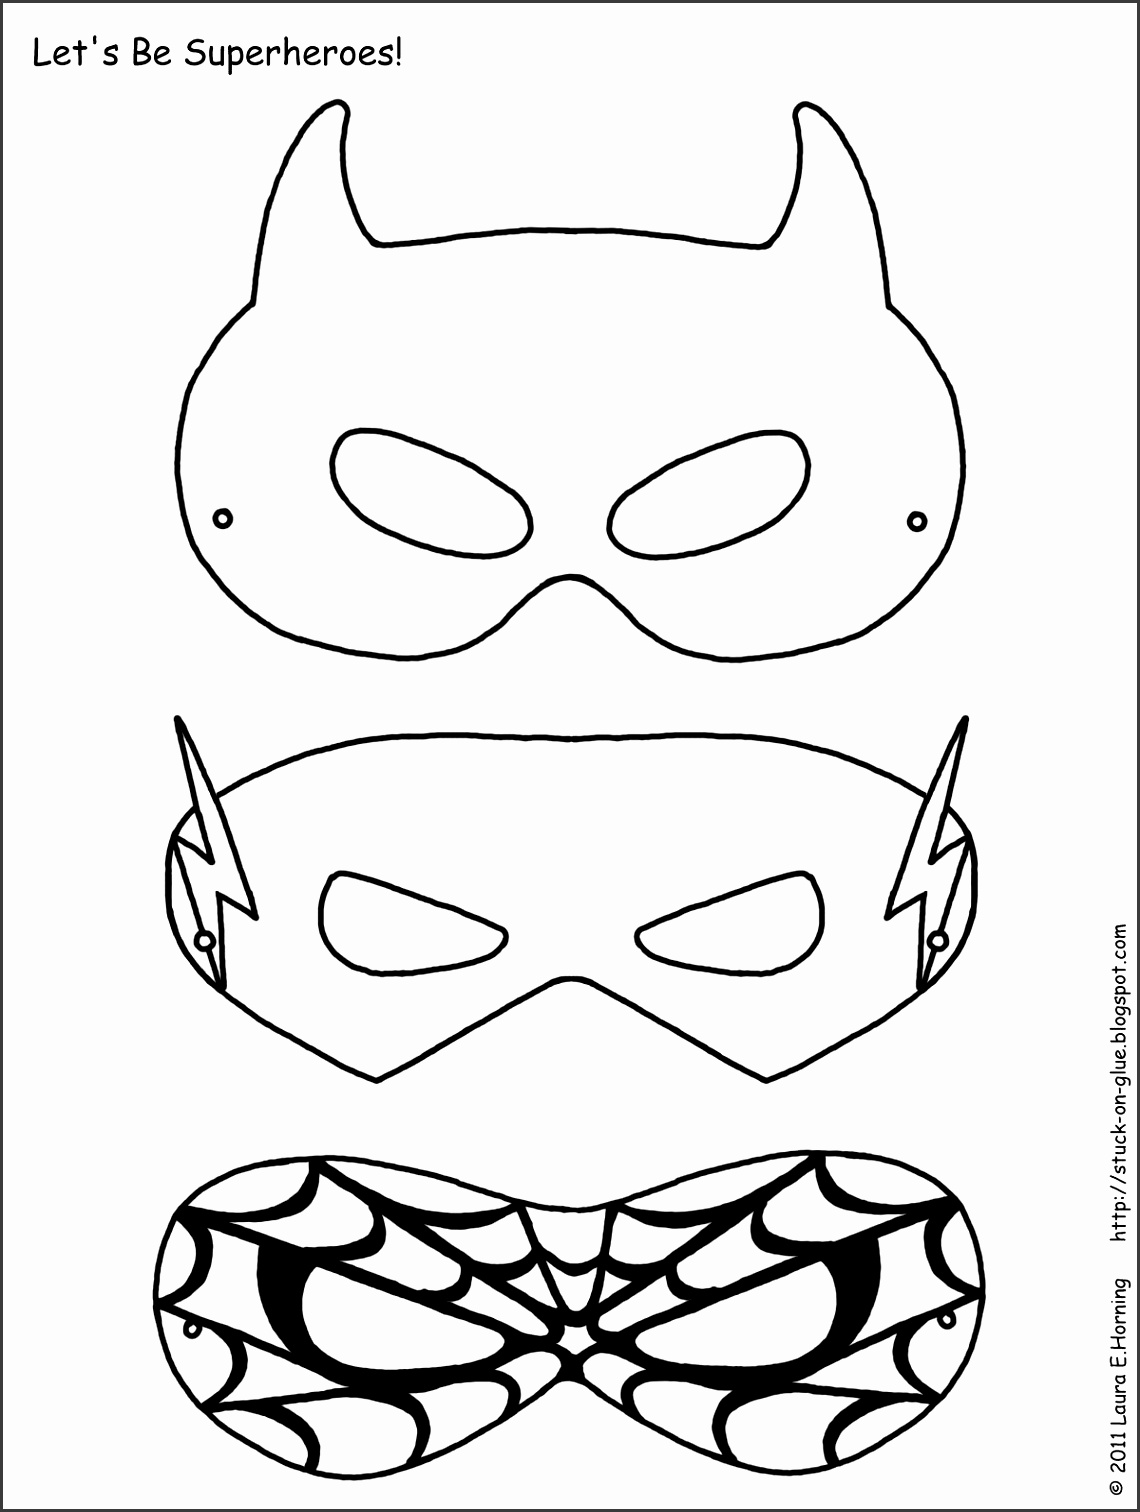 Printable super hero masks Hours of Fun Color them the way they want glue to a cereal box cut & use pipe cleaners to wrap around or elastic So simple